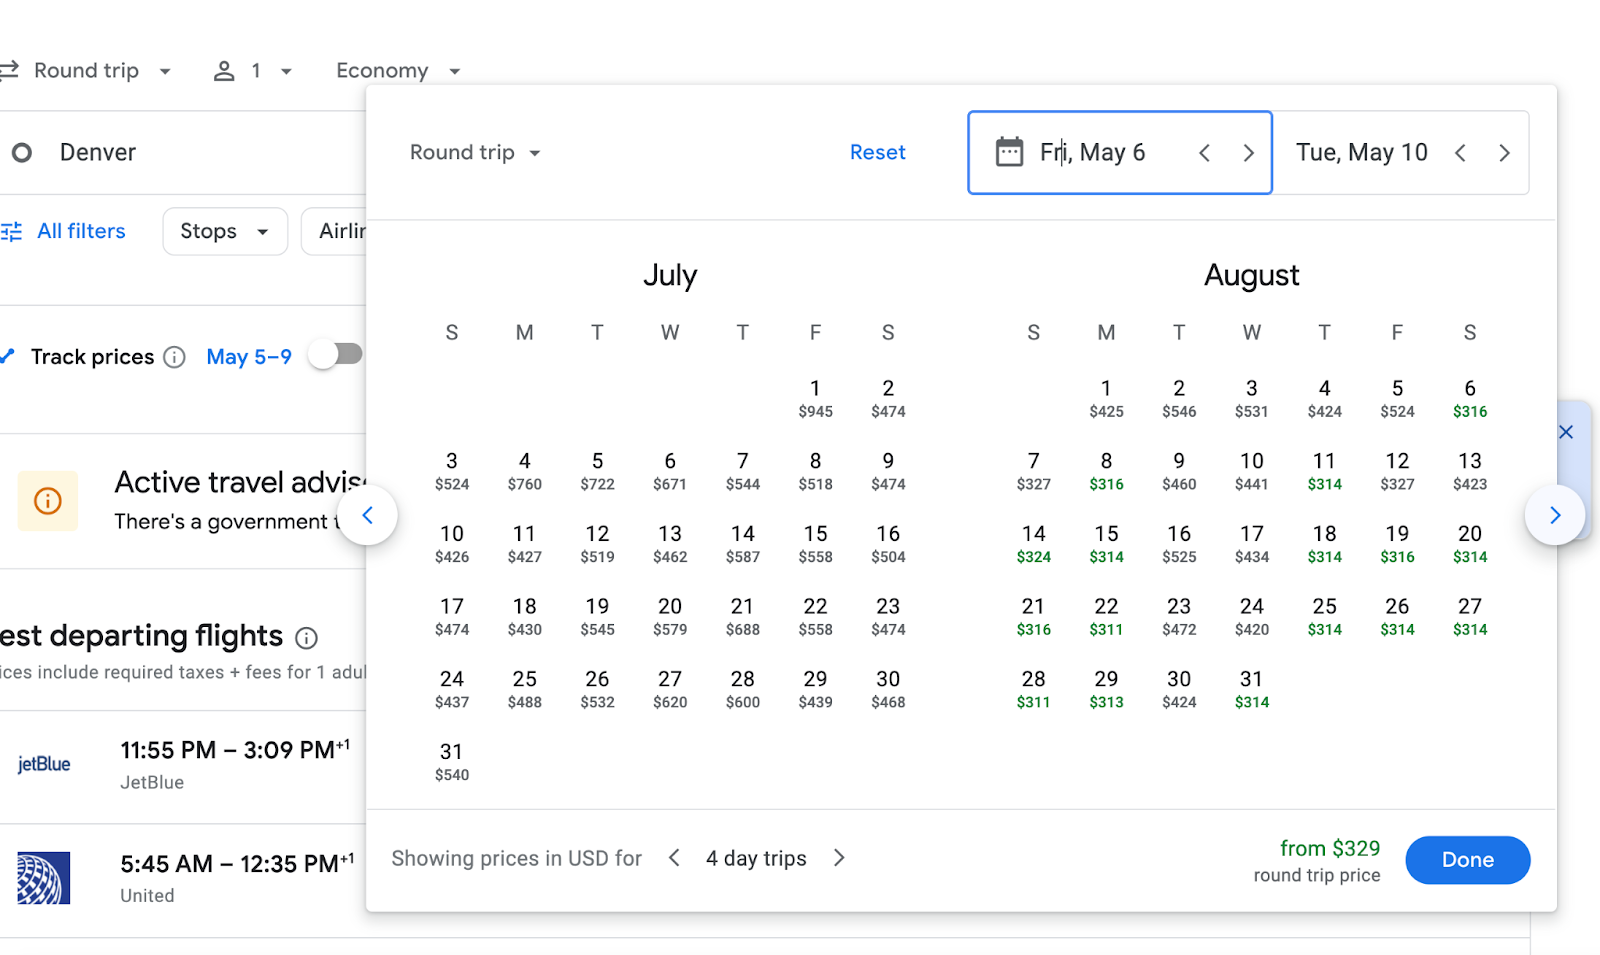 How to change the calendar view in Google Flights